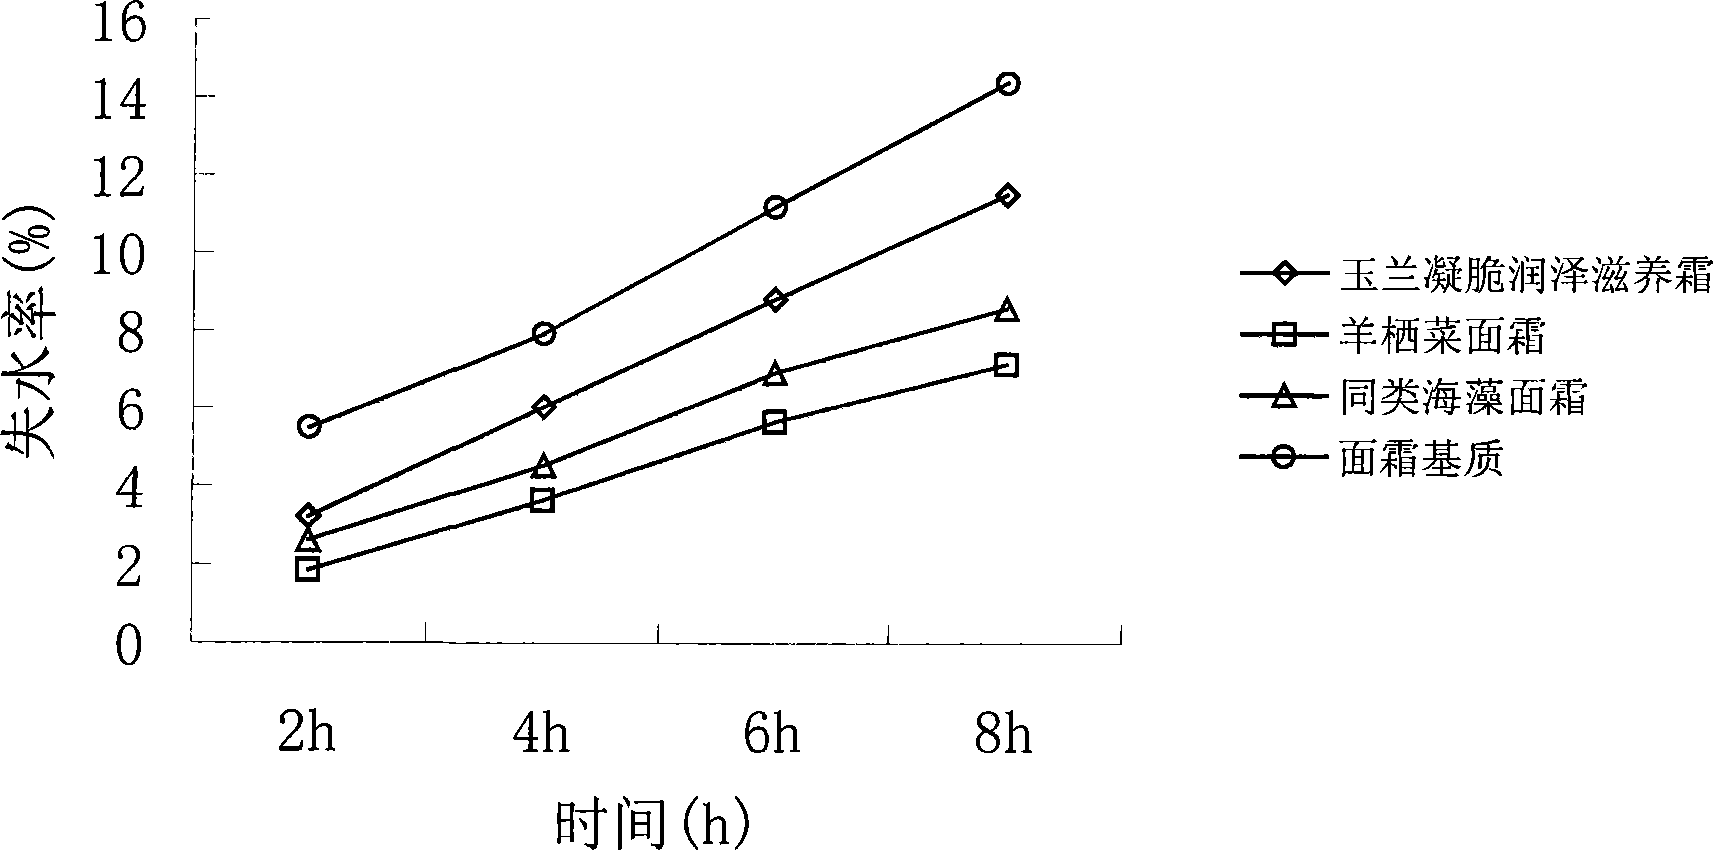 Multiple-effect washing cream and method of preparing the same